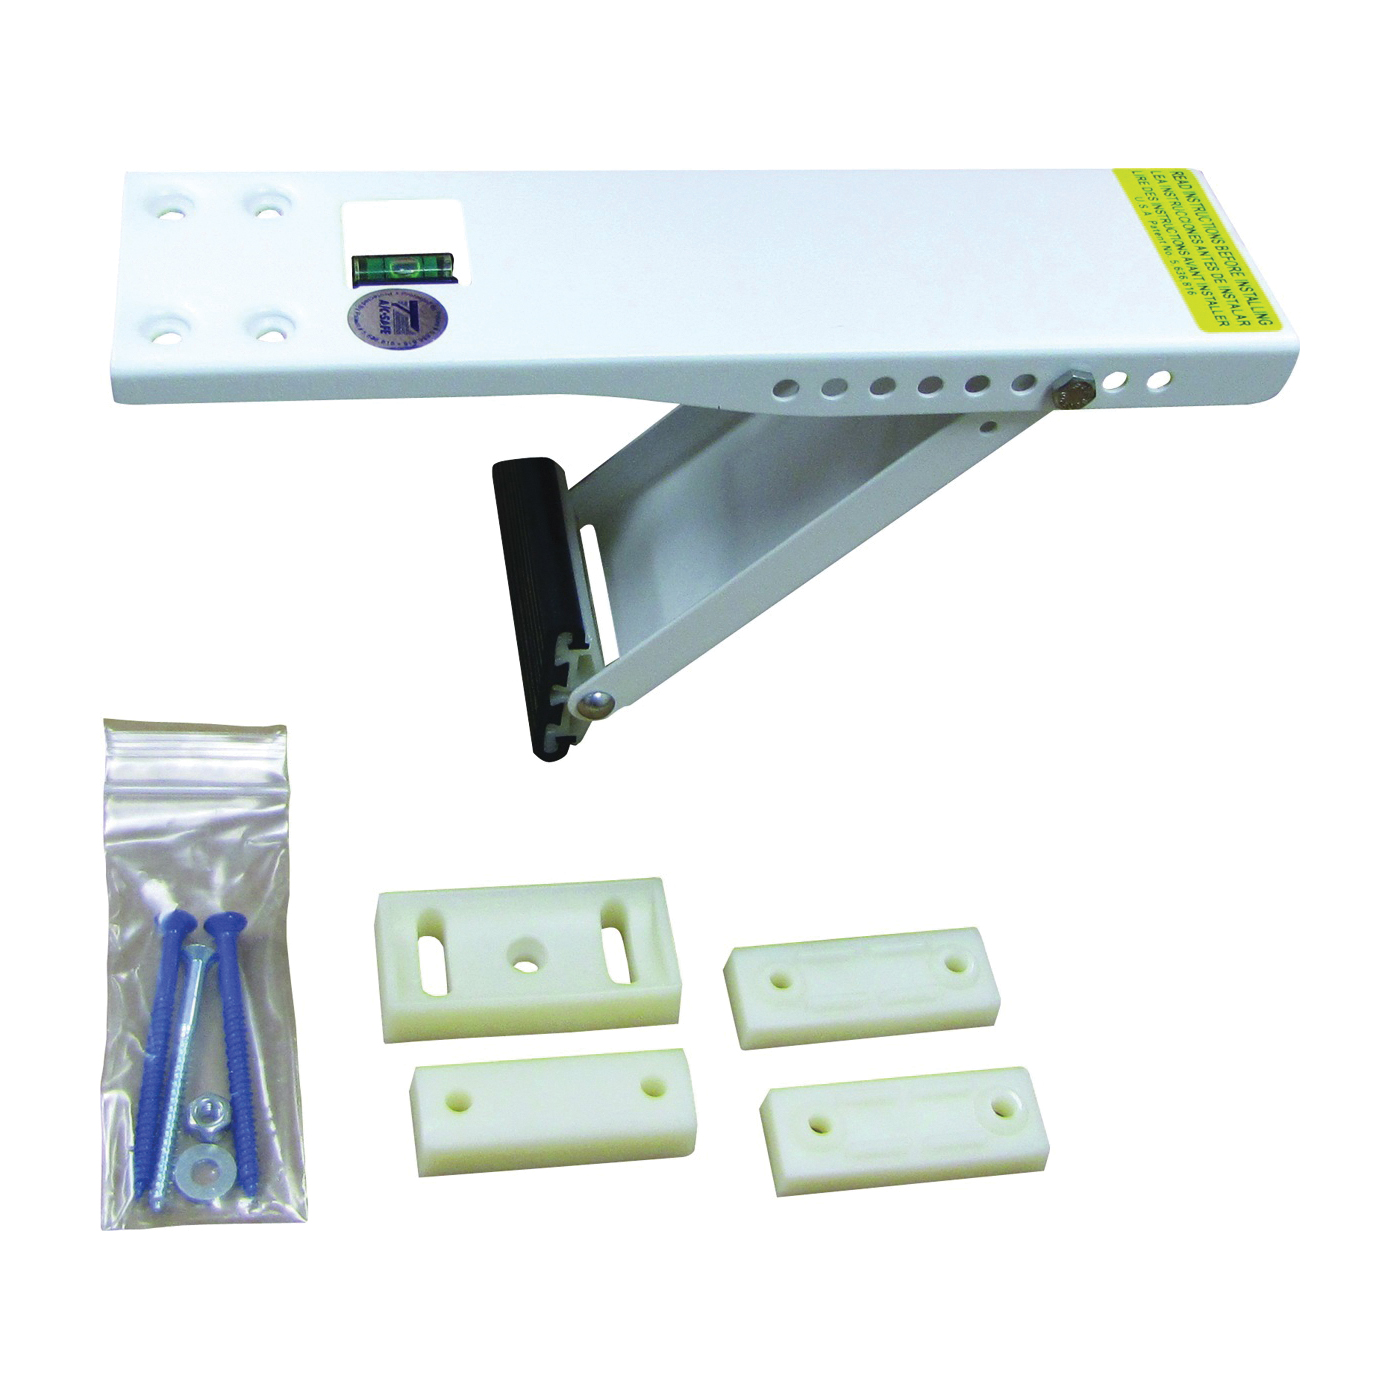 AS080 Window Support Bracket, Steel, Baked-On Epoxy, For: Air Conditioners up to 80 lb